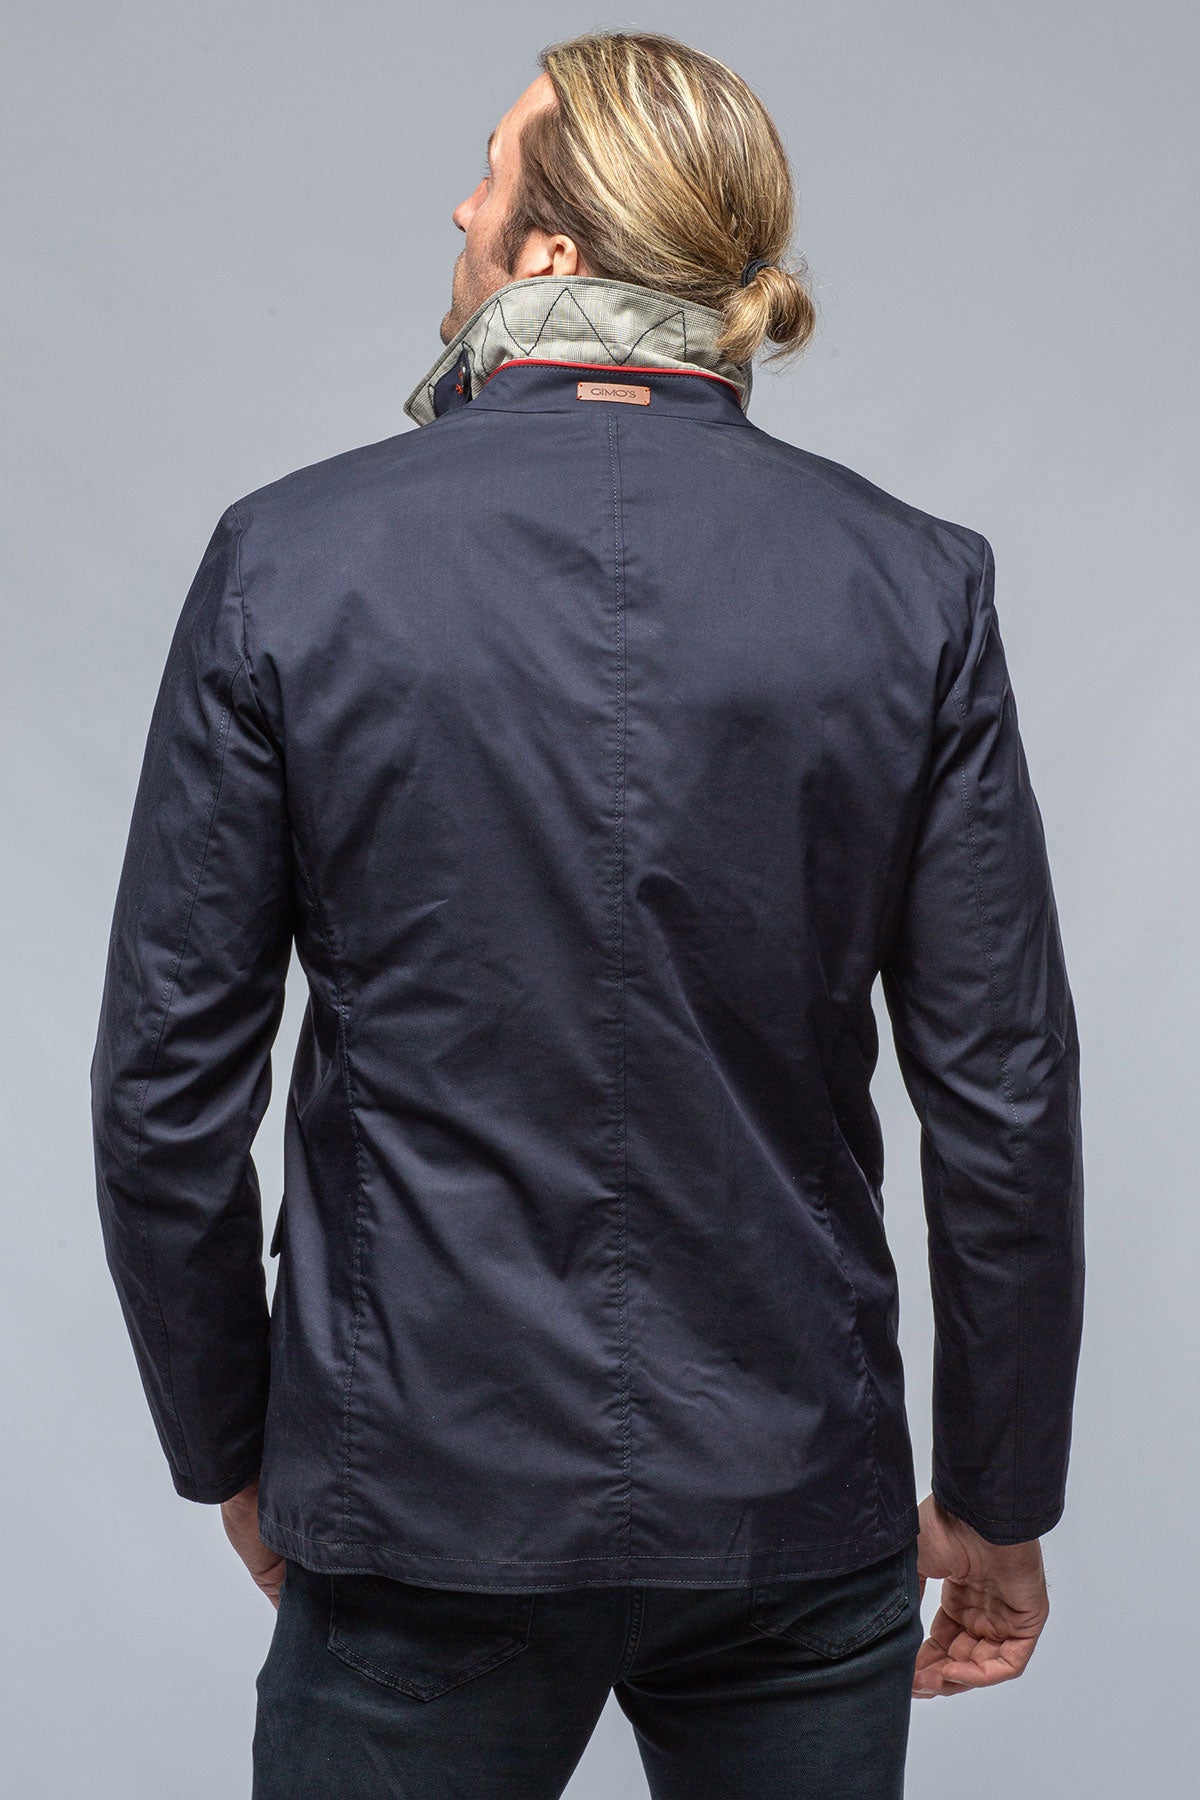 Ellers Performance Jacket | Warehouse - Mens - Outerwear - Cloth | Gimo's